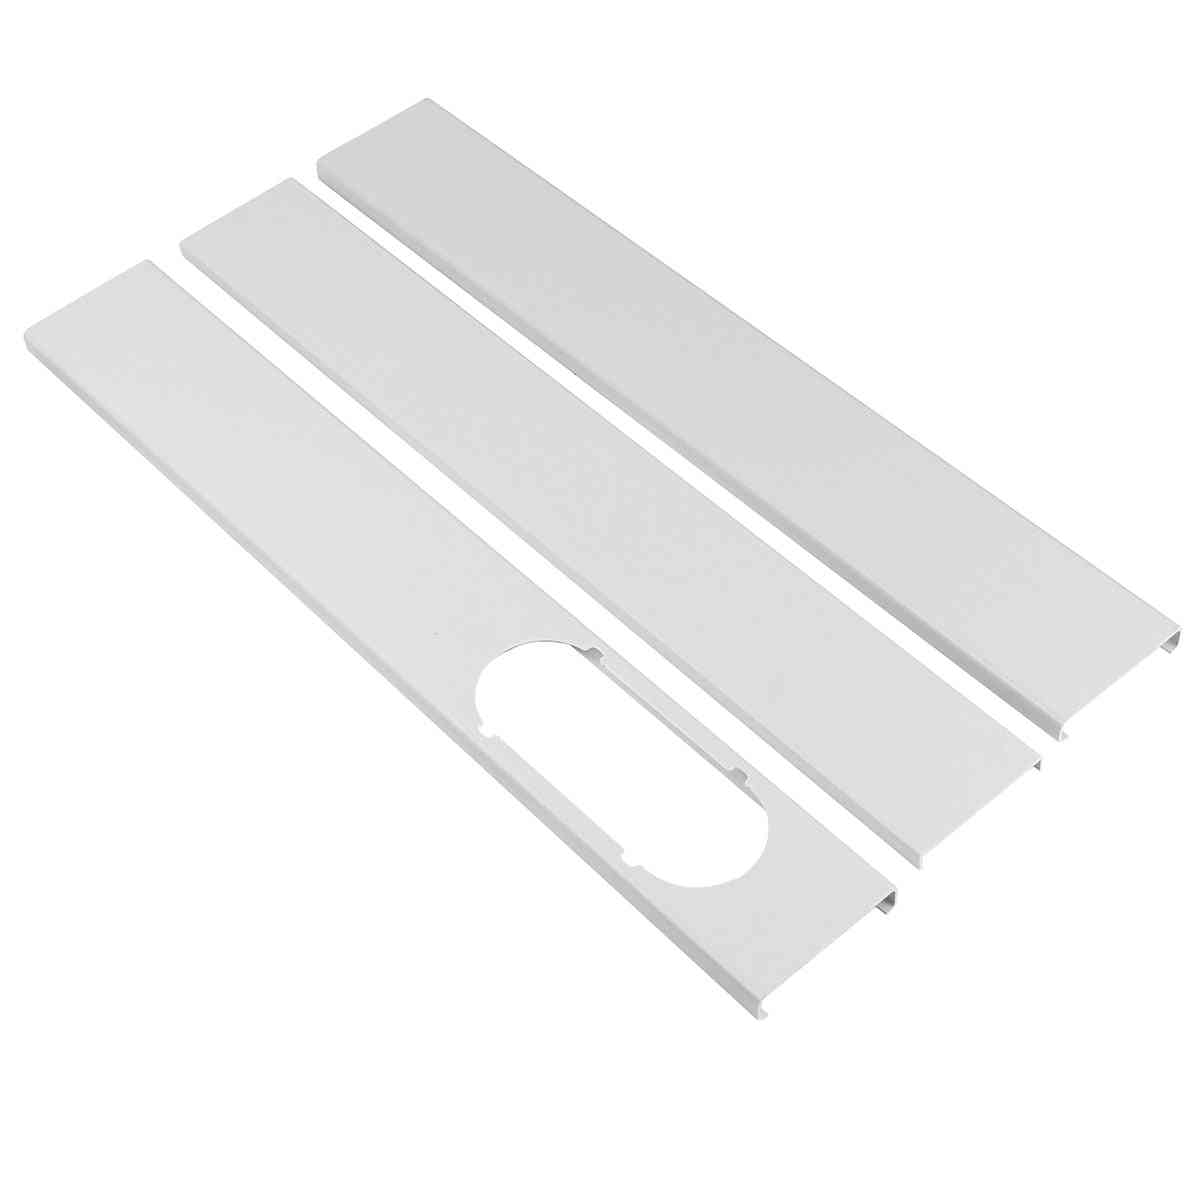 Window Slide Kit Plate For Portable Air Conditioner